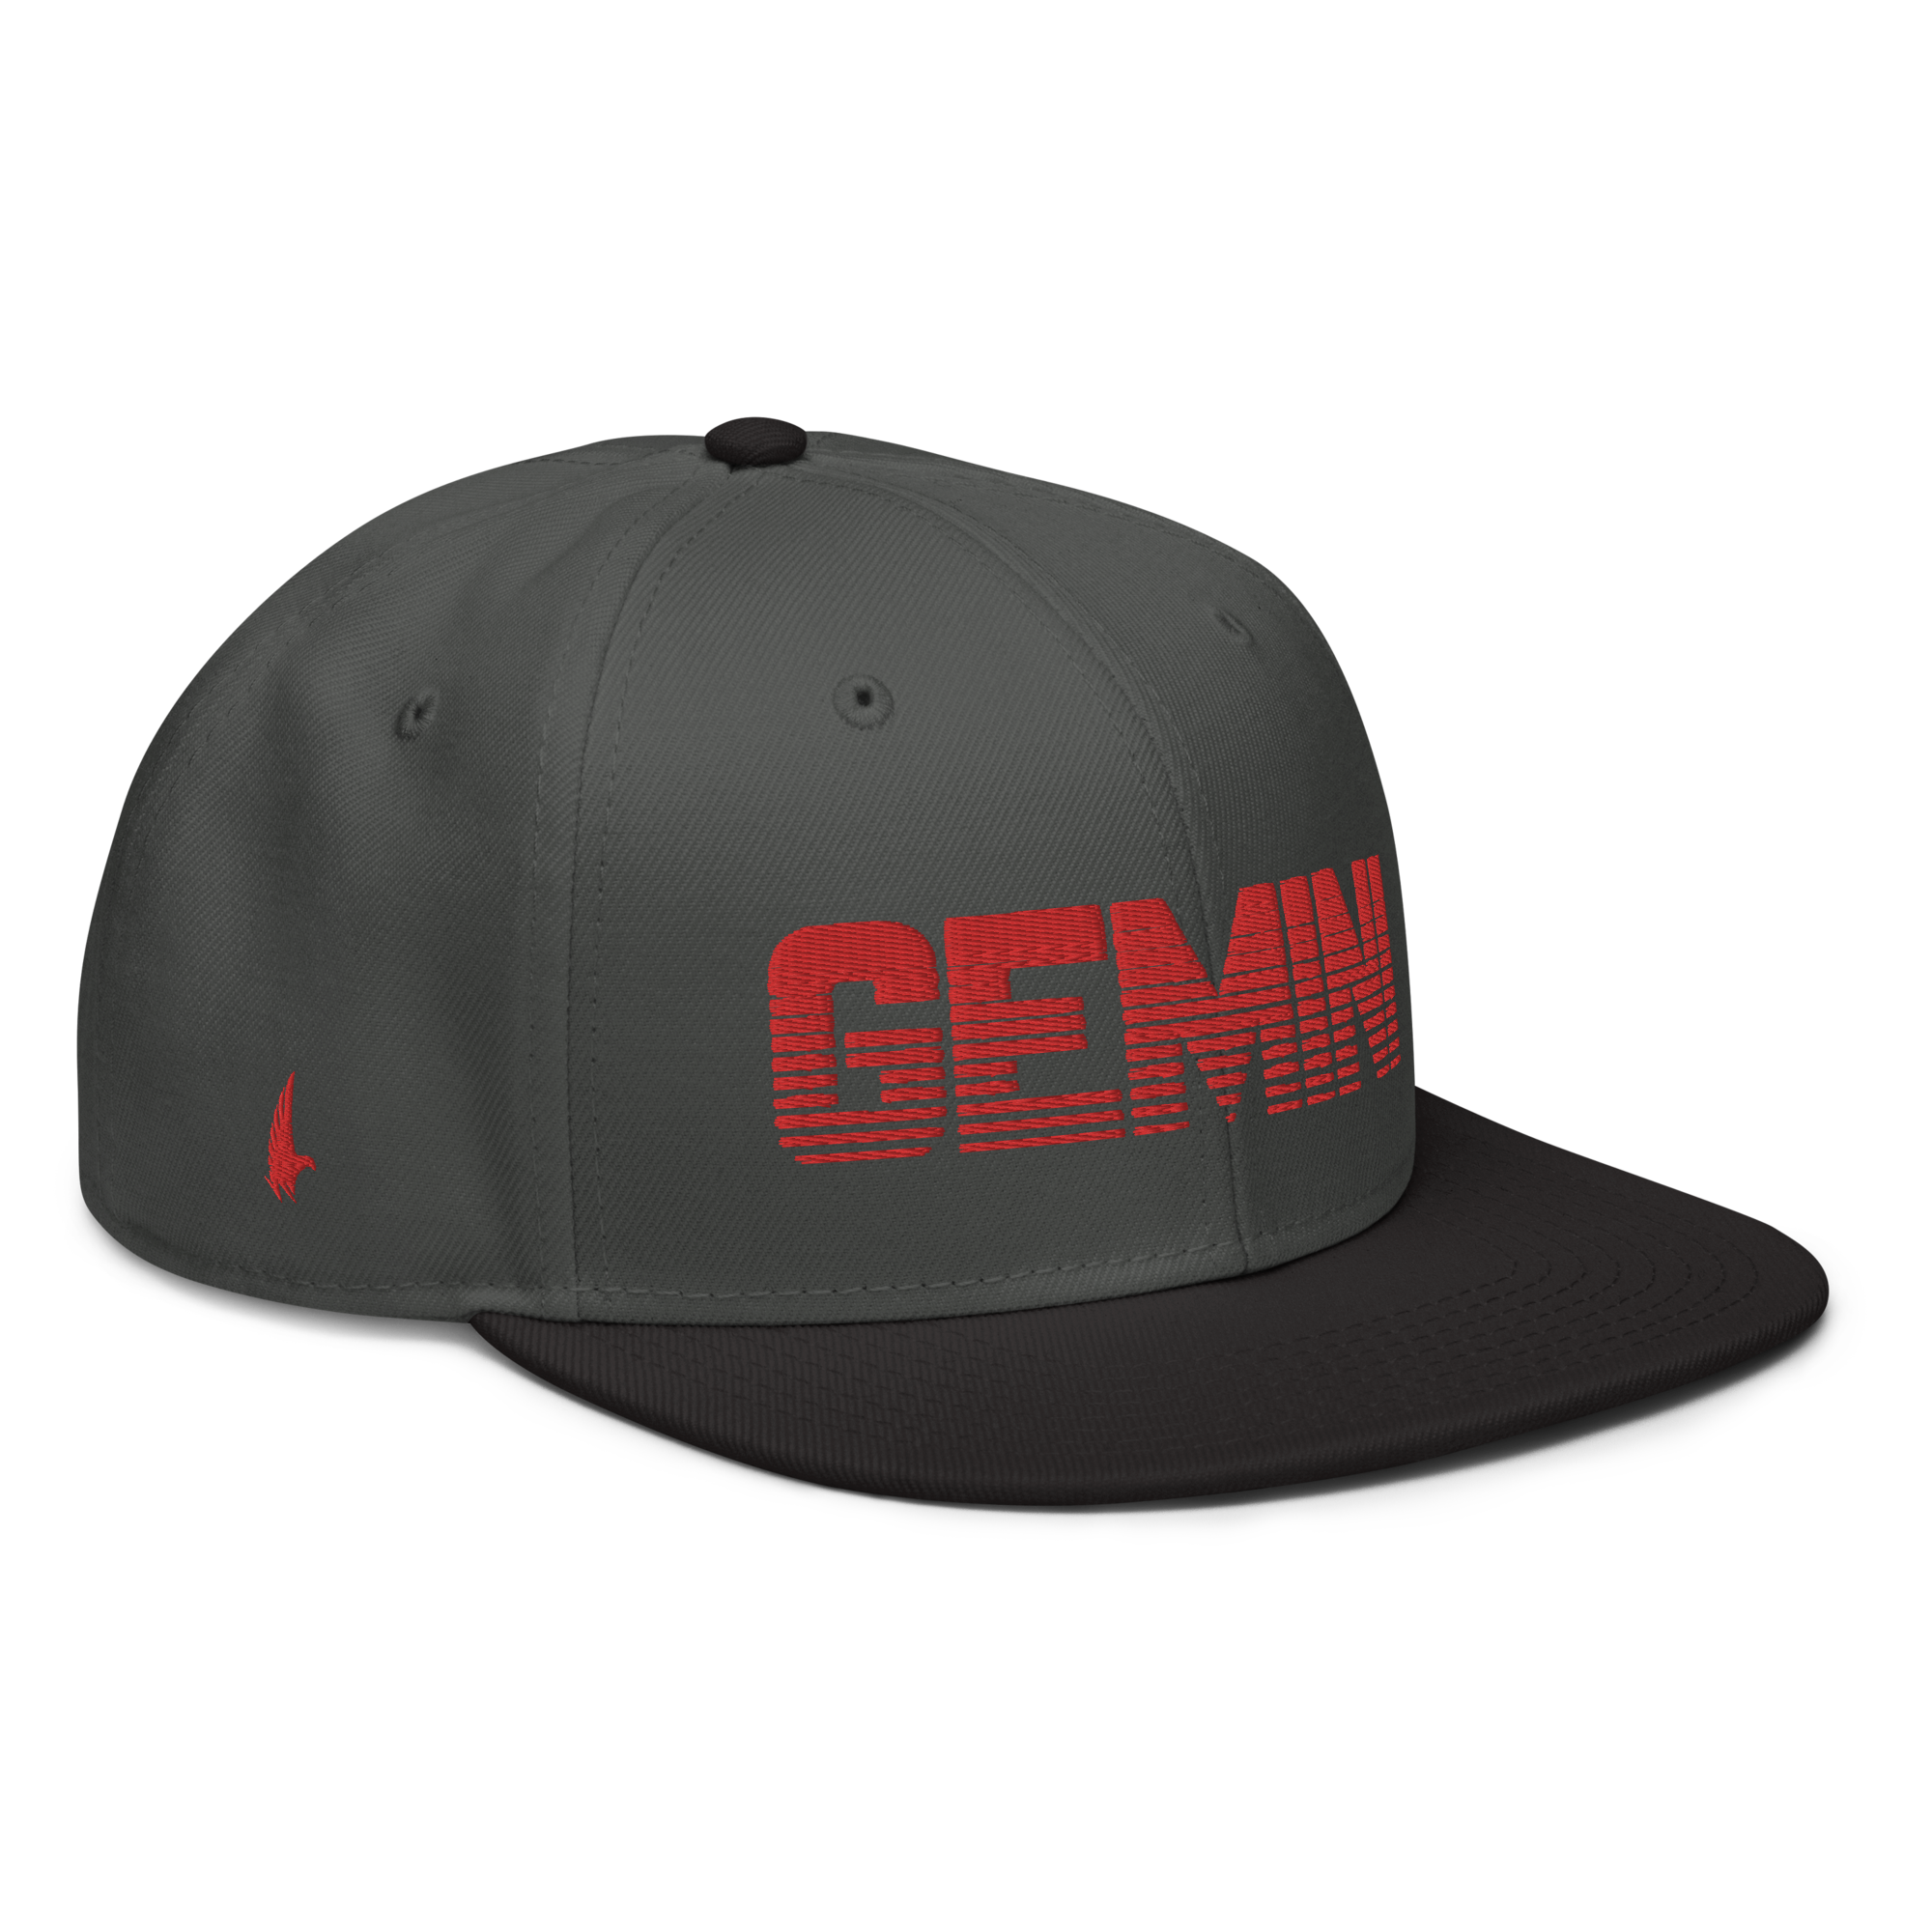 Gemini Snapback Hat - Charcoal Gray / Red - Loyalty Vibes